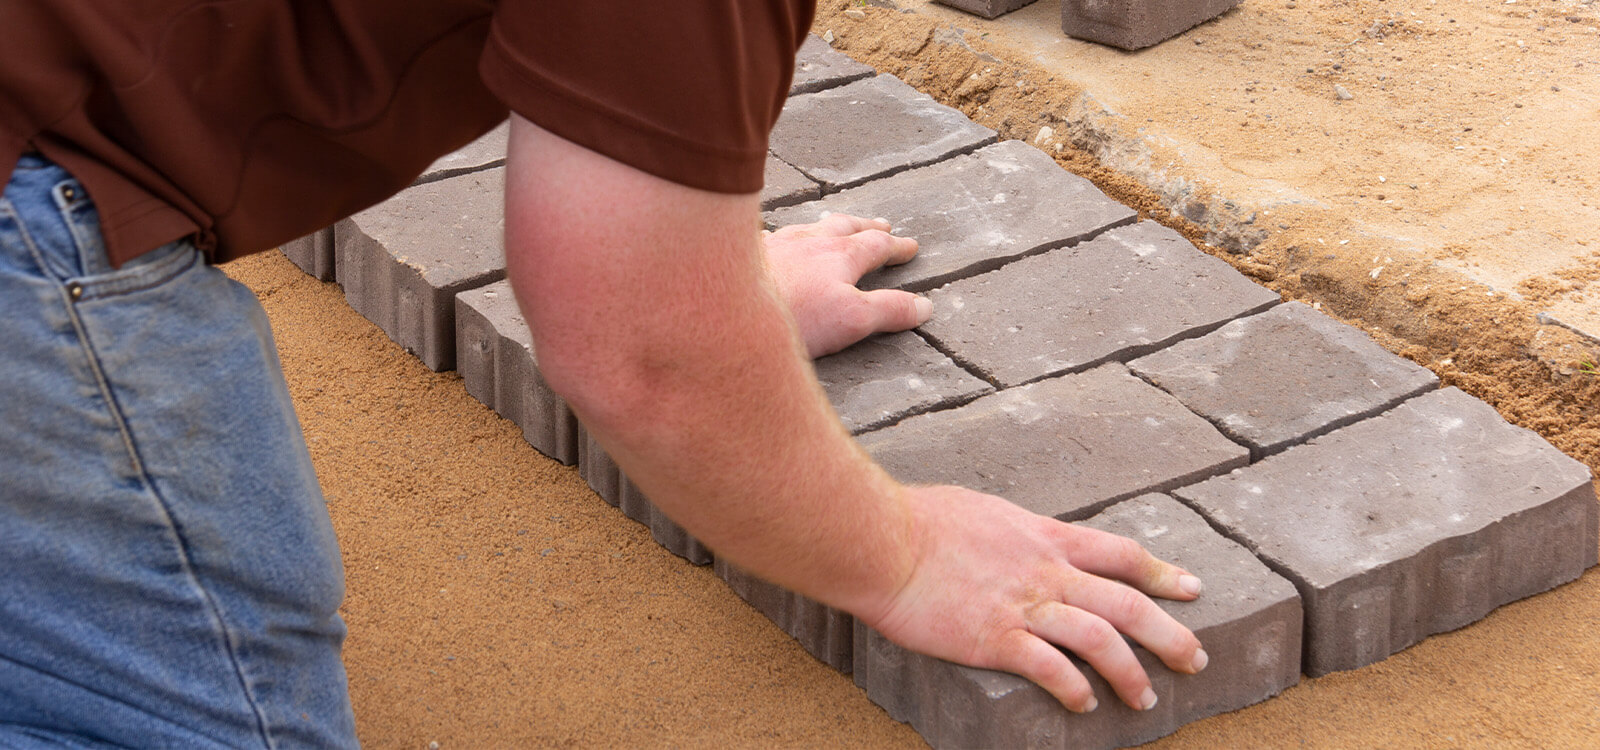 Close-up of a craftsman's hands laying and aligning brick pavers on a sand base, demonstrating attention to detail in patio construction.